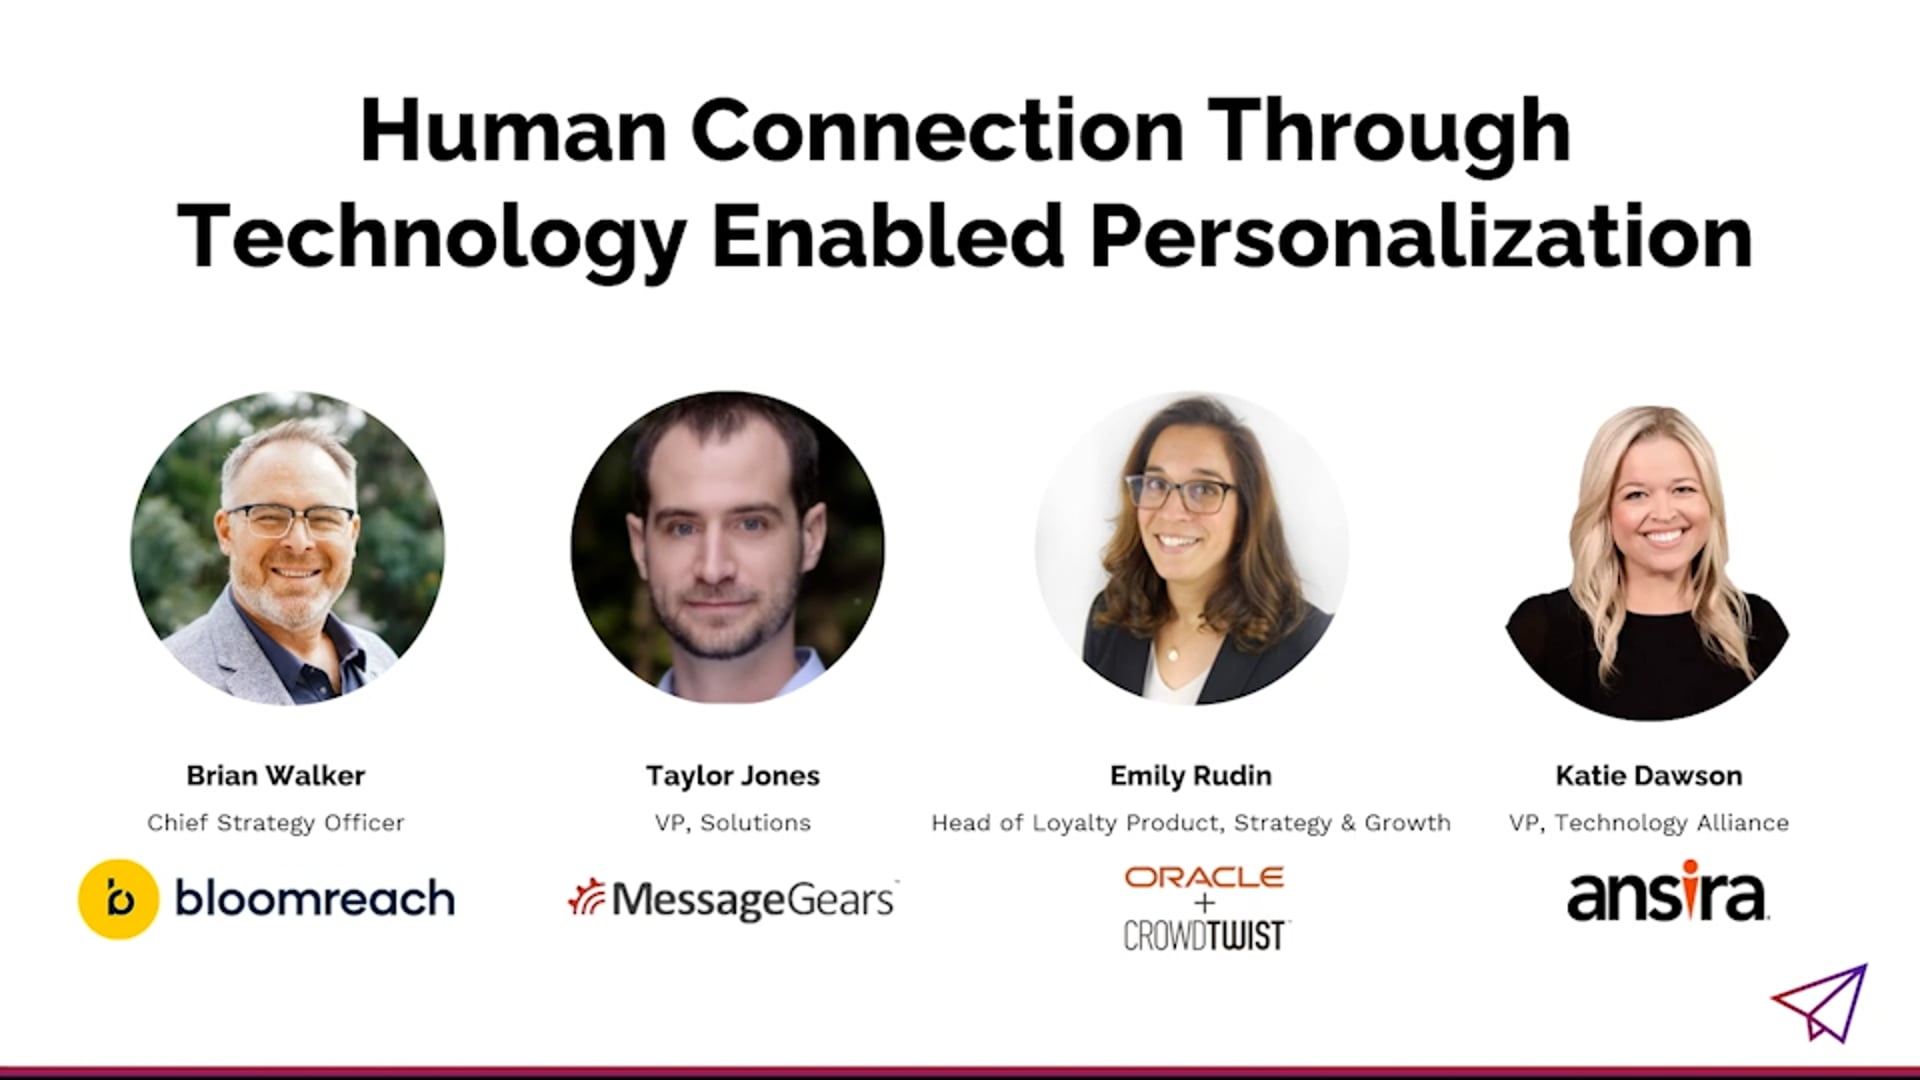 Human Connections Through Technology Enabled Personalization